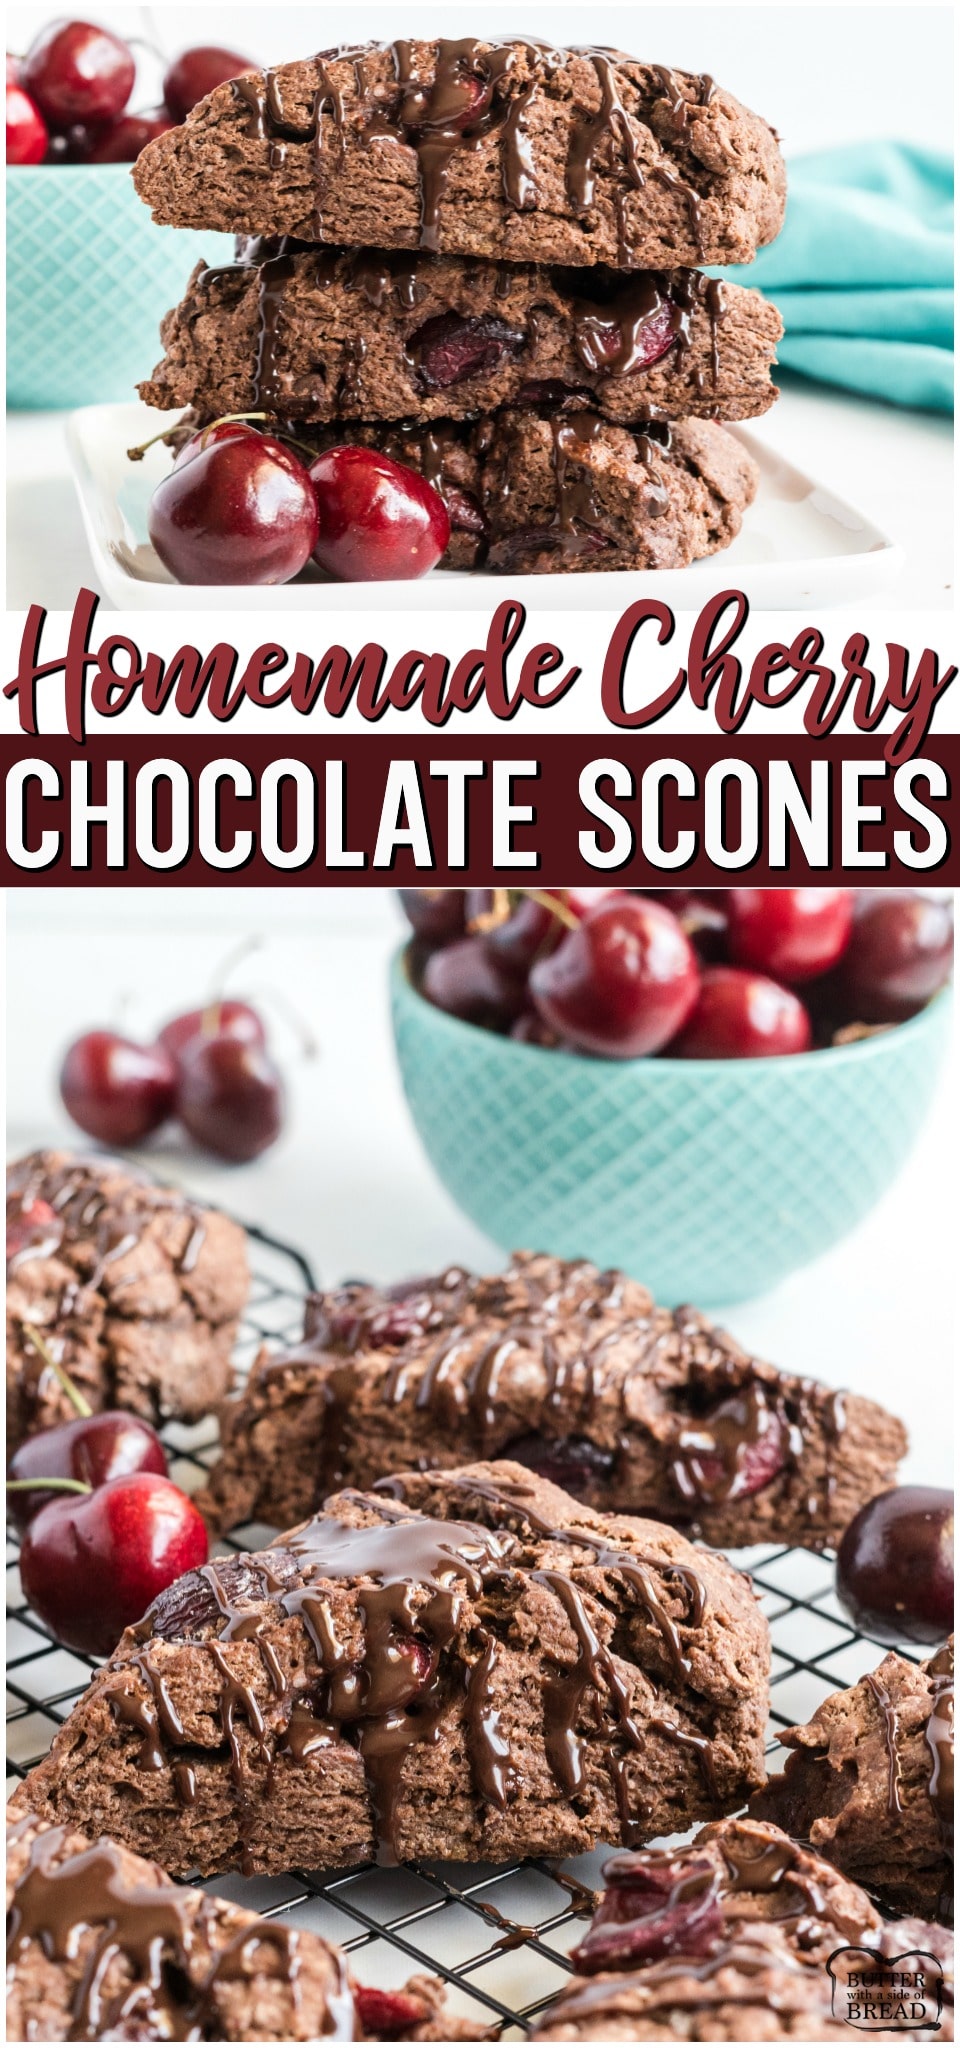 Cherry Chocolate Scones made with fresh cherries & dark chocolate for a perfect soft, sweet chocolate scone. Soft & flavorful homemade scone recipe great for breakfast or a treat! #scones #cherry #chocolate #baking #recipe #breakfast #dessert #scones from BUTTER WITH A SIDE OF BREAD